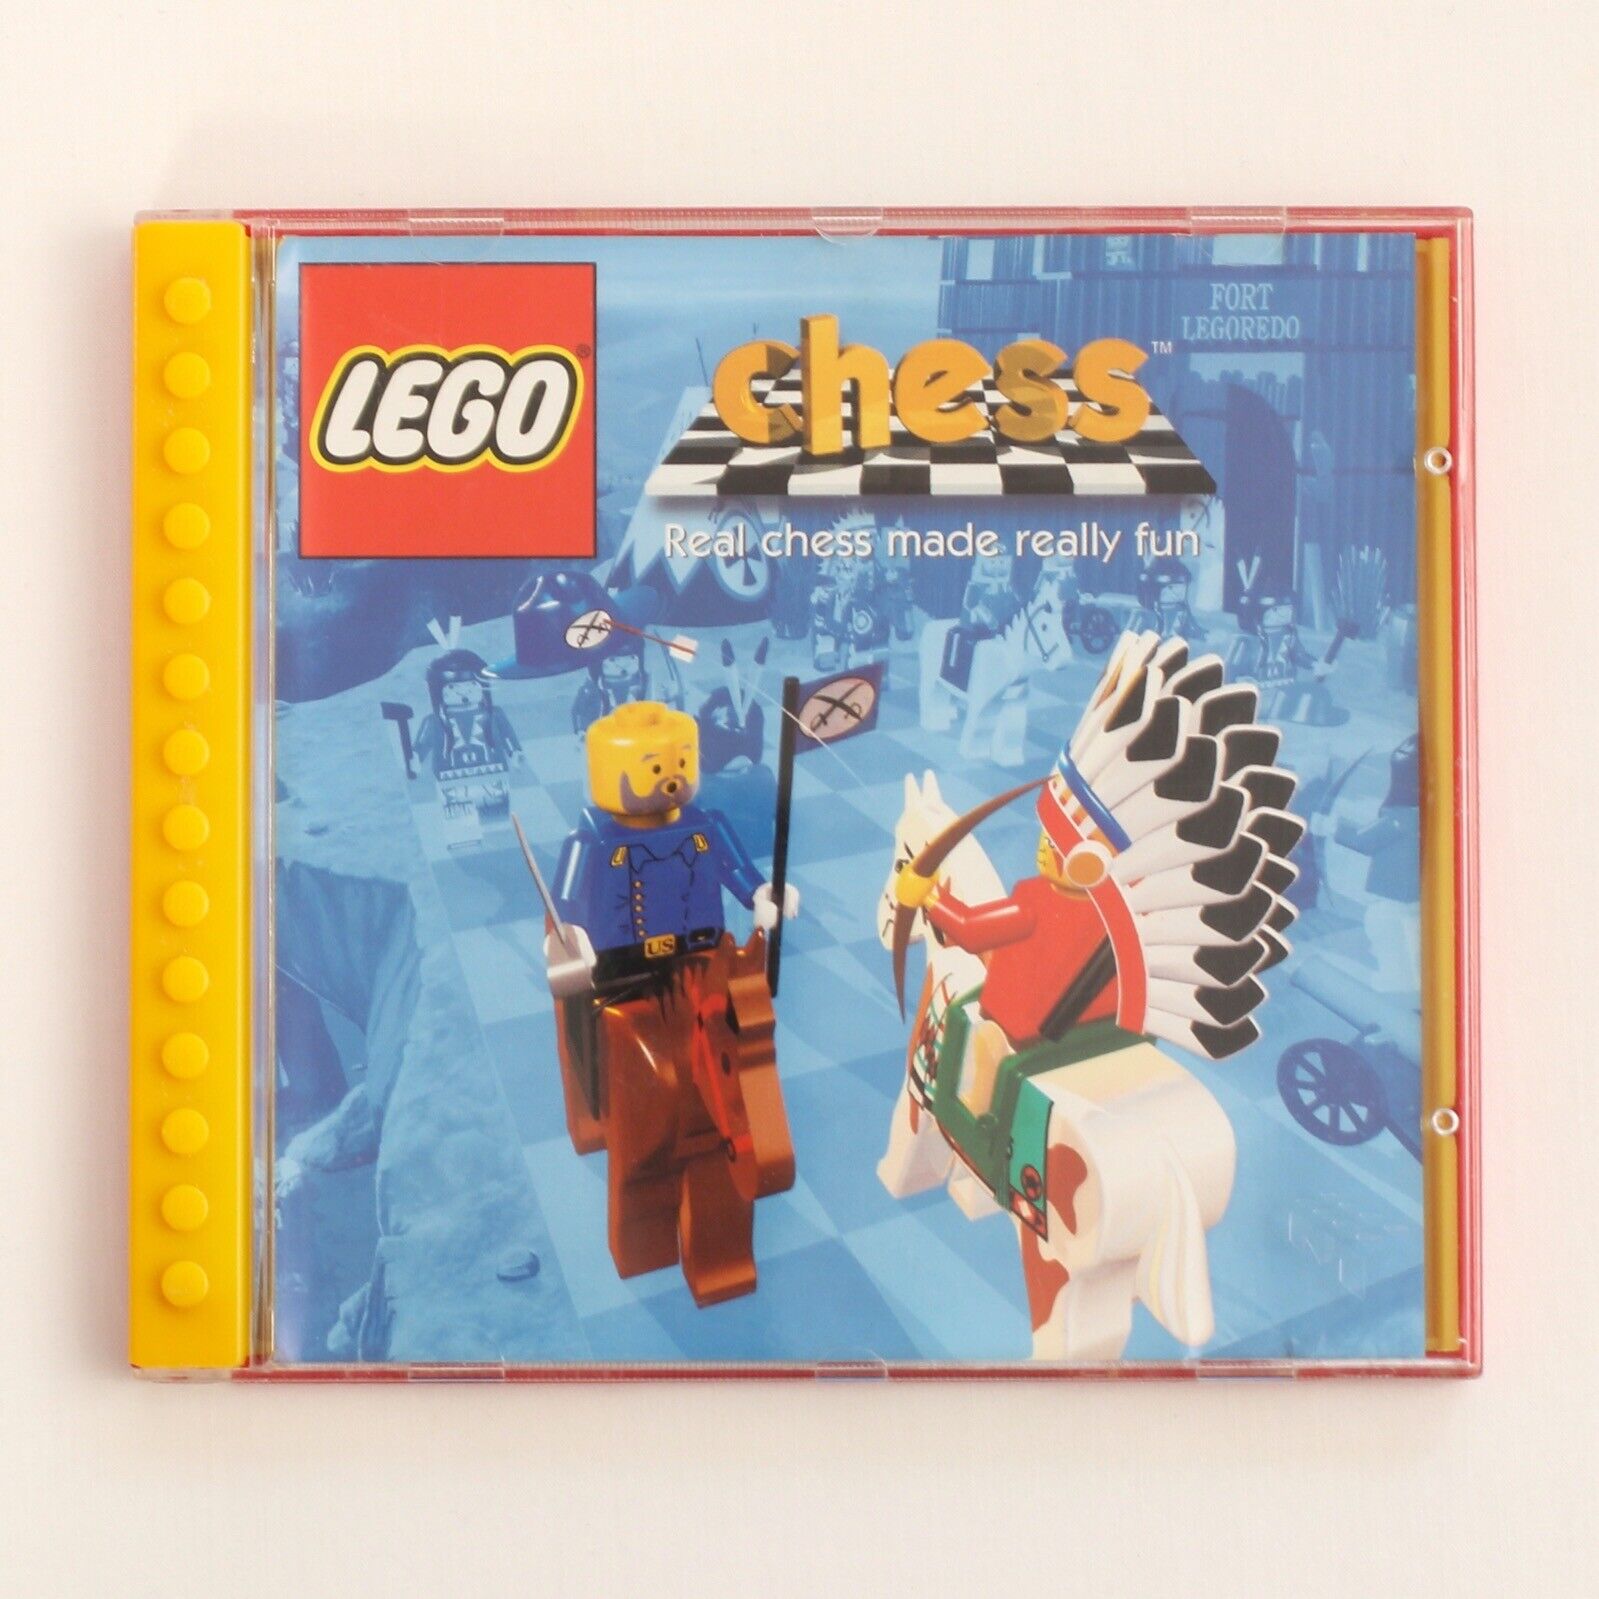 LEGO Chess Vintage PC Game for Windows from 1998 CD-ROM